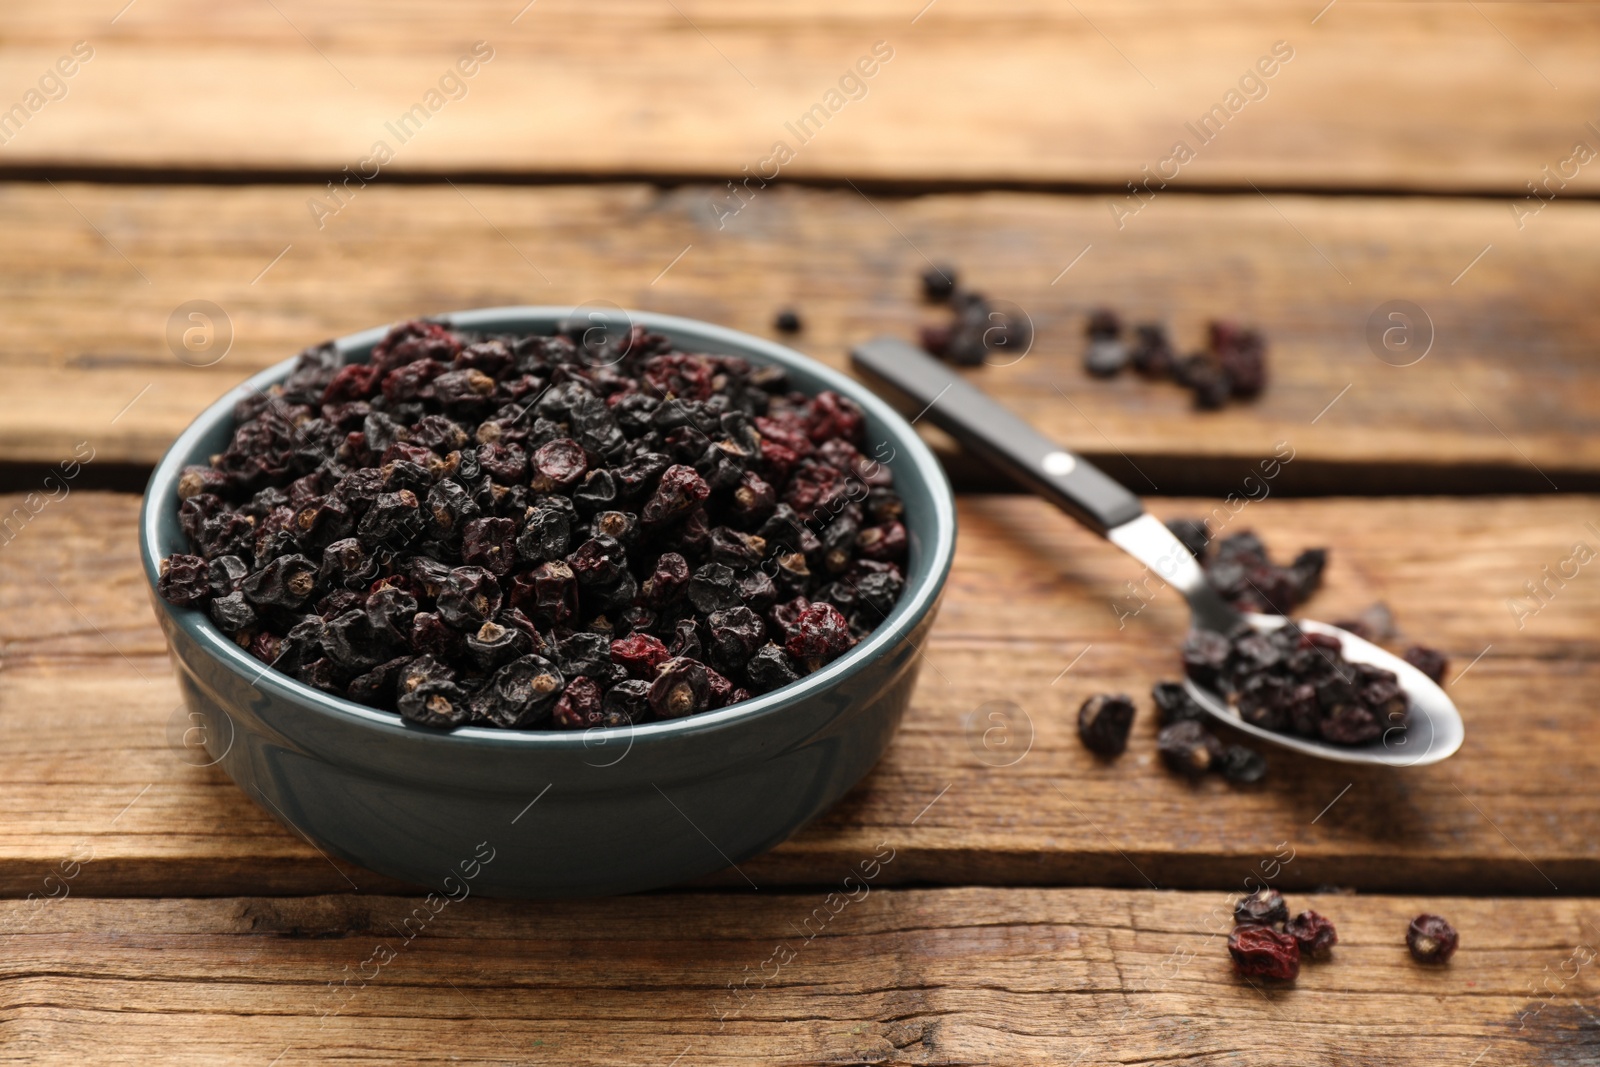 Photo of Dried black currant berries on wooden table